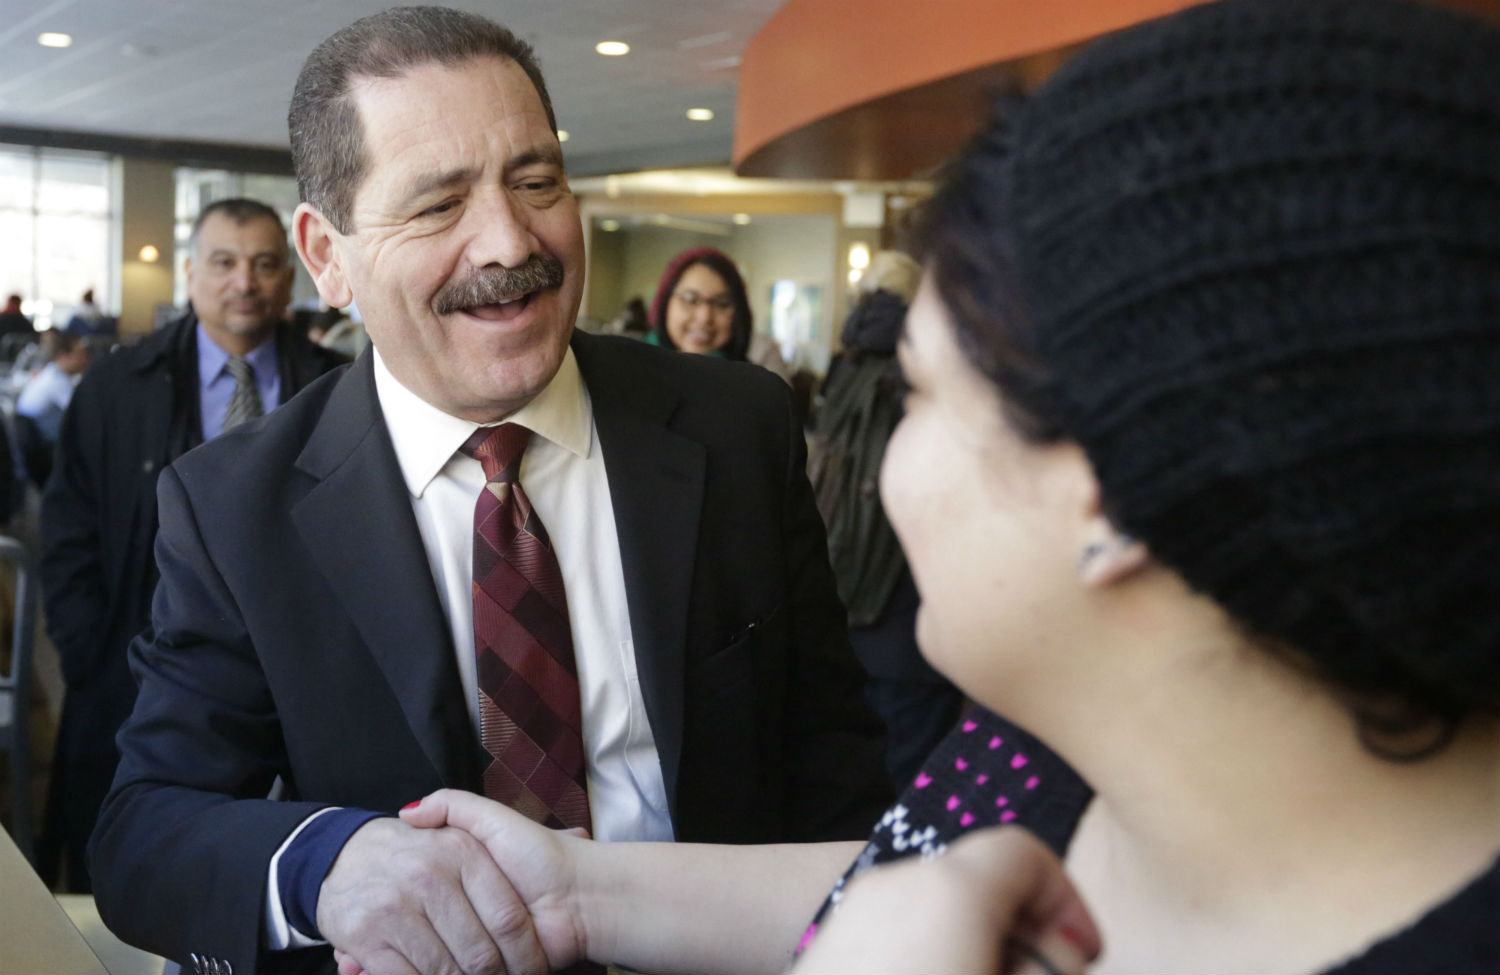 Chicago’s Chuy Garcia Lost an Election, but Won a Movement